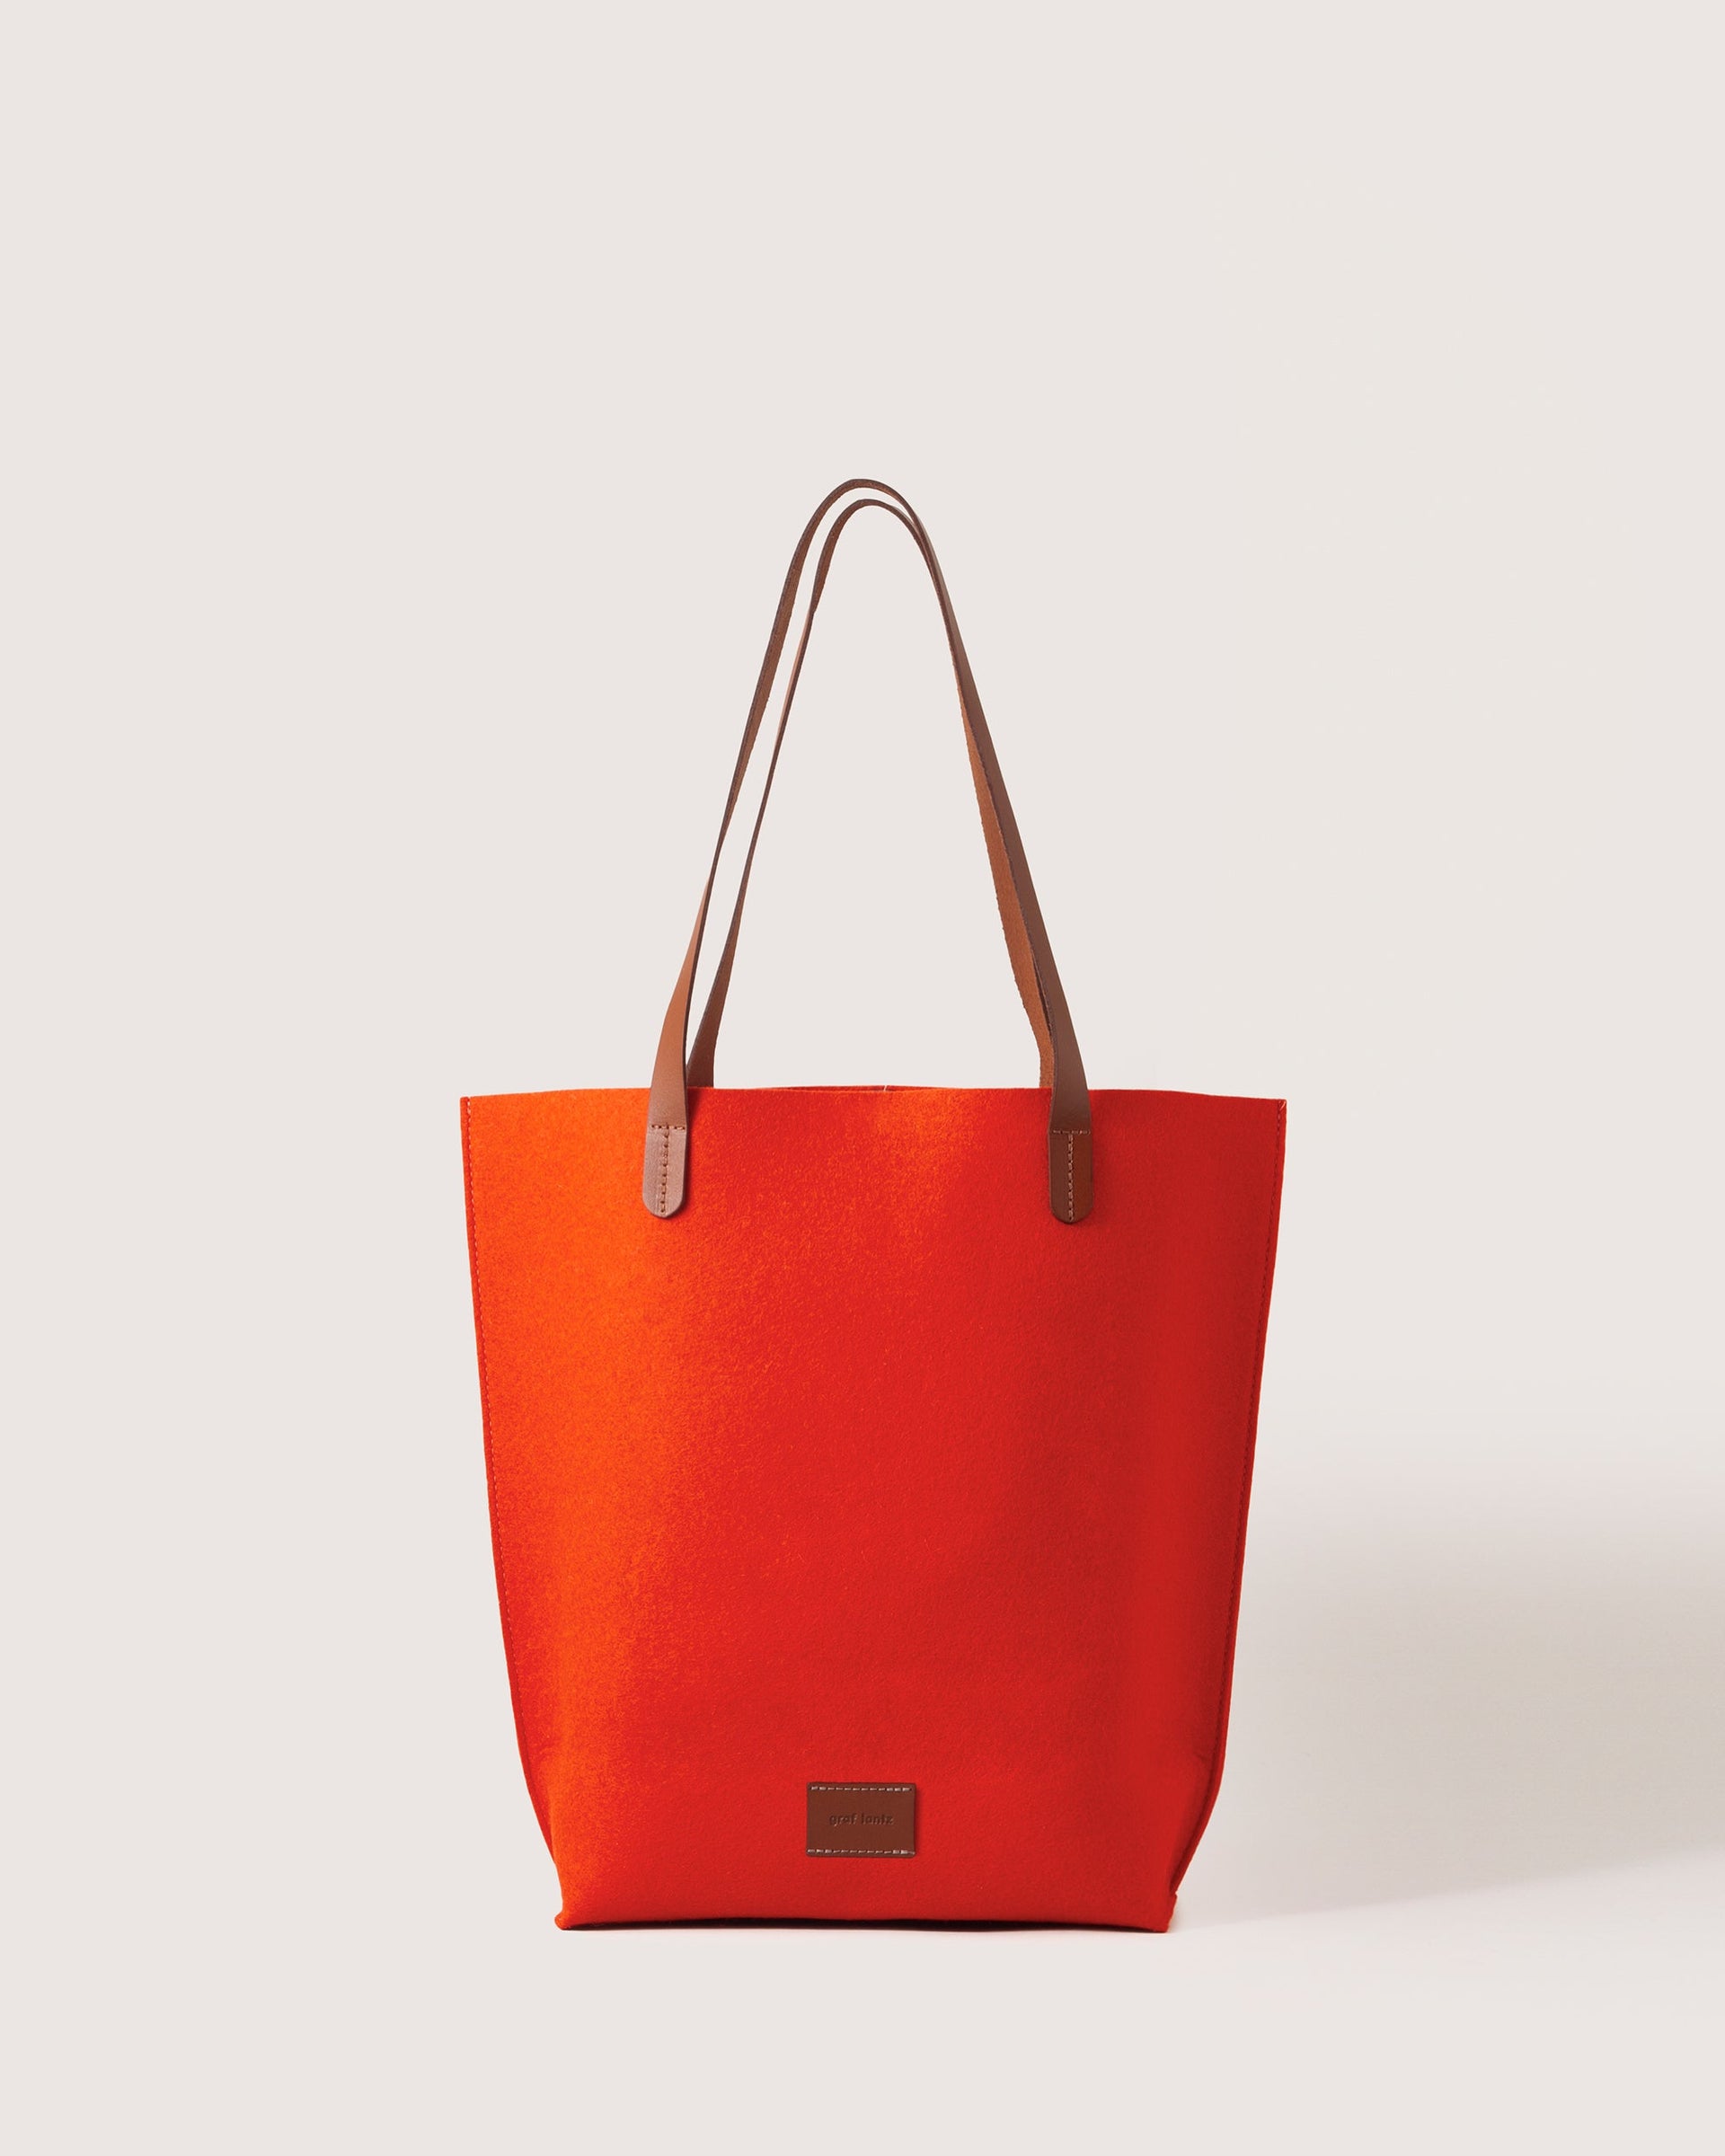 Orange Merino Wool Tote bag with brown leather handle, front view, white background